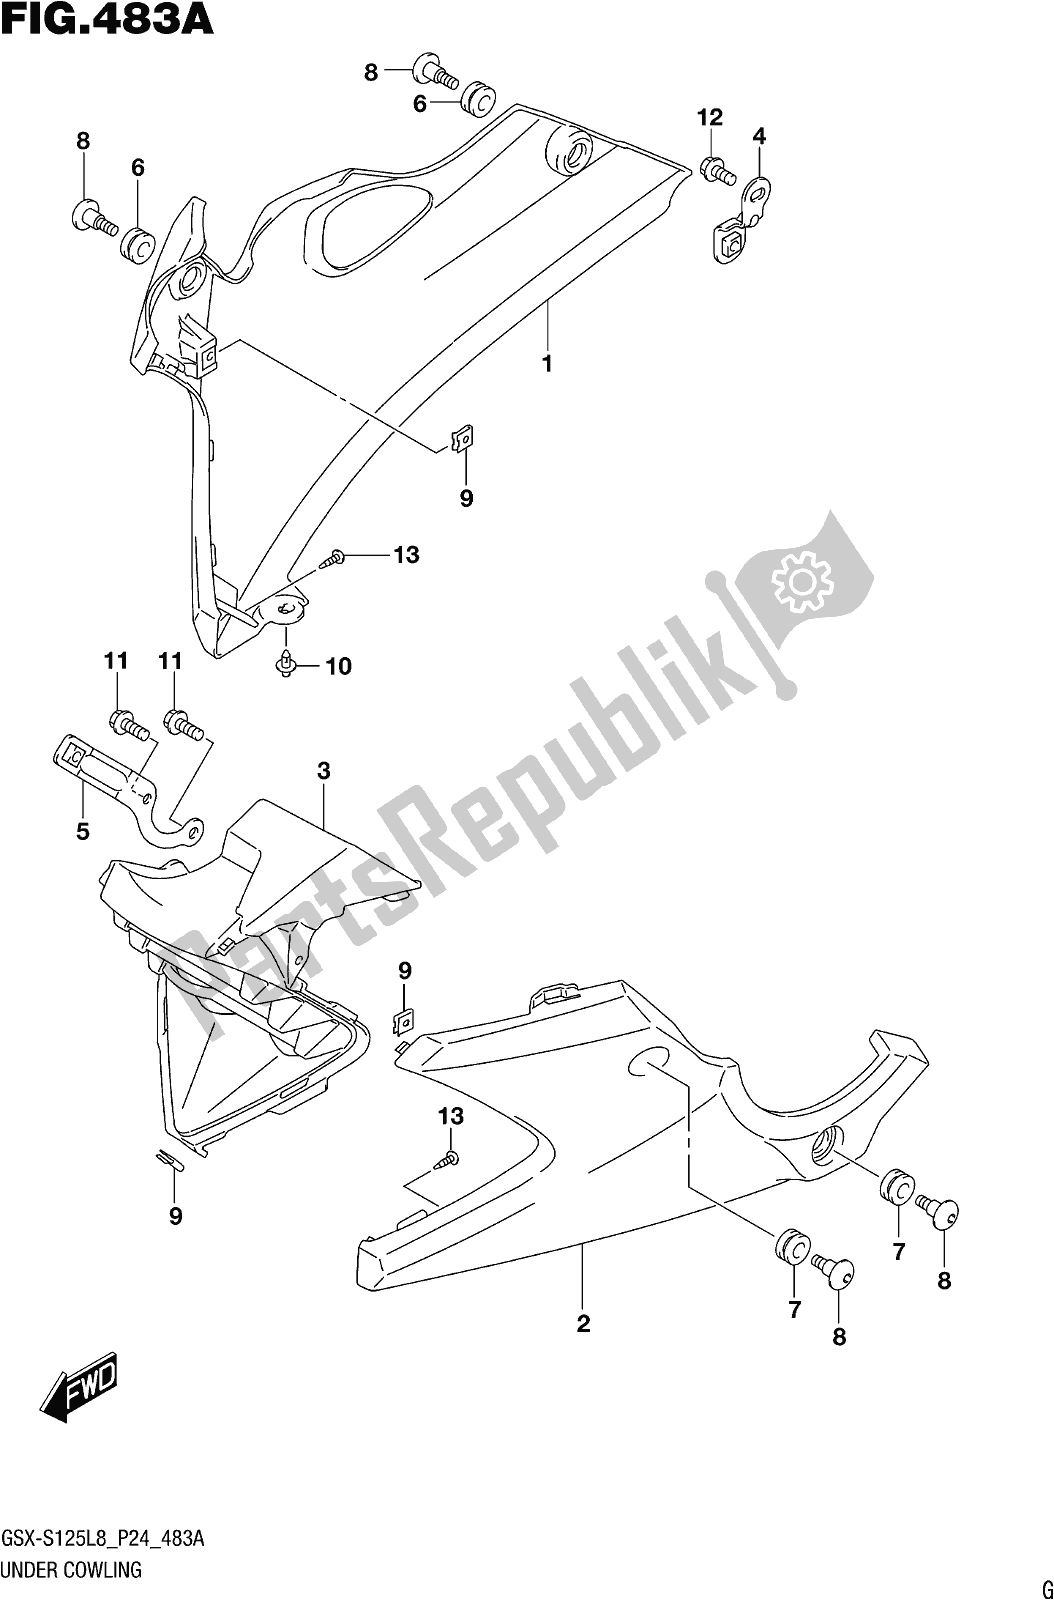 All parts for the Fig. 483a Under Cowling of the Suzuki Gsx-s 125 ML 2018